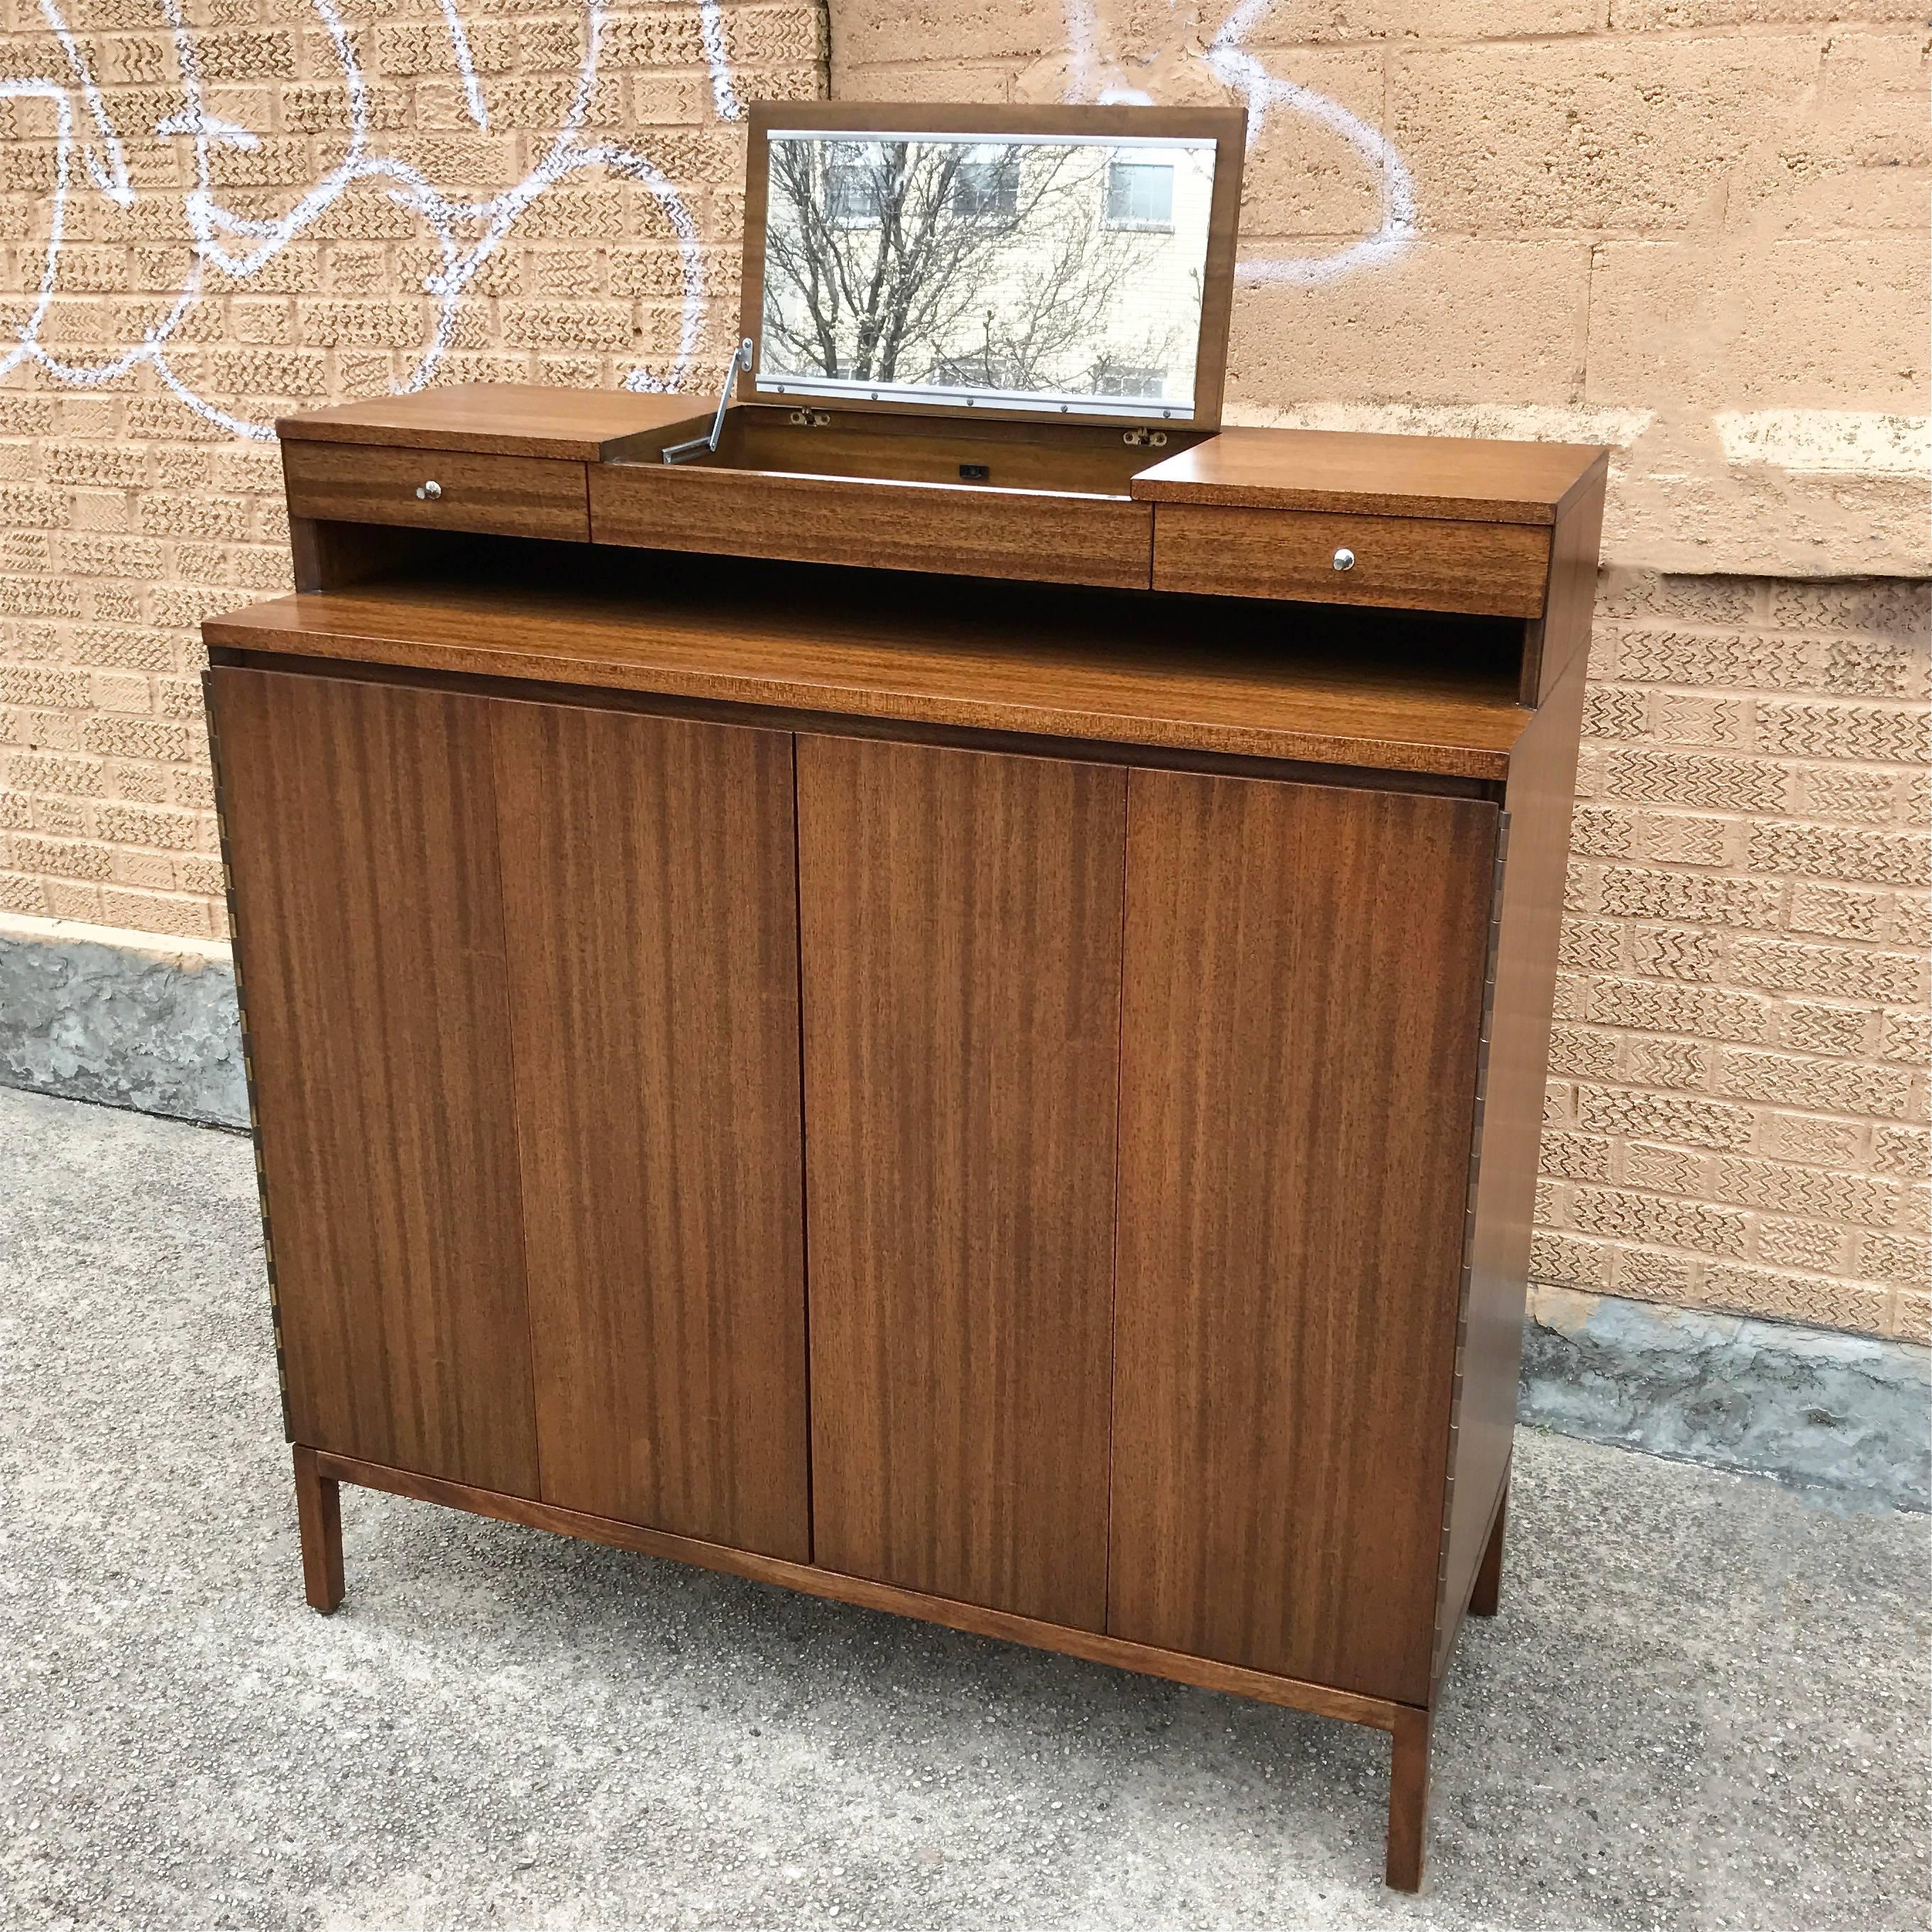 Mid-Century Modern Tall Gentleman's Chest Dresser by Paul McCobb for Calvin the Irwin Collection